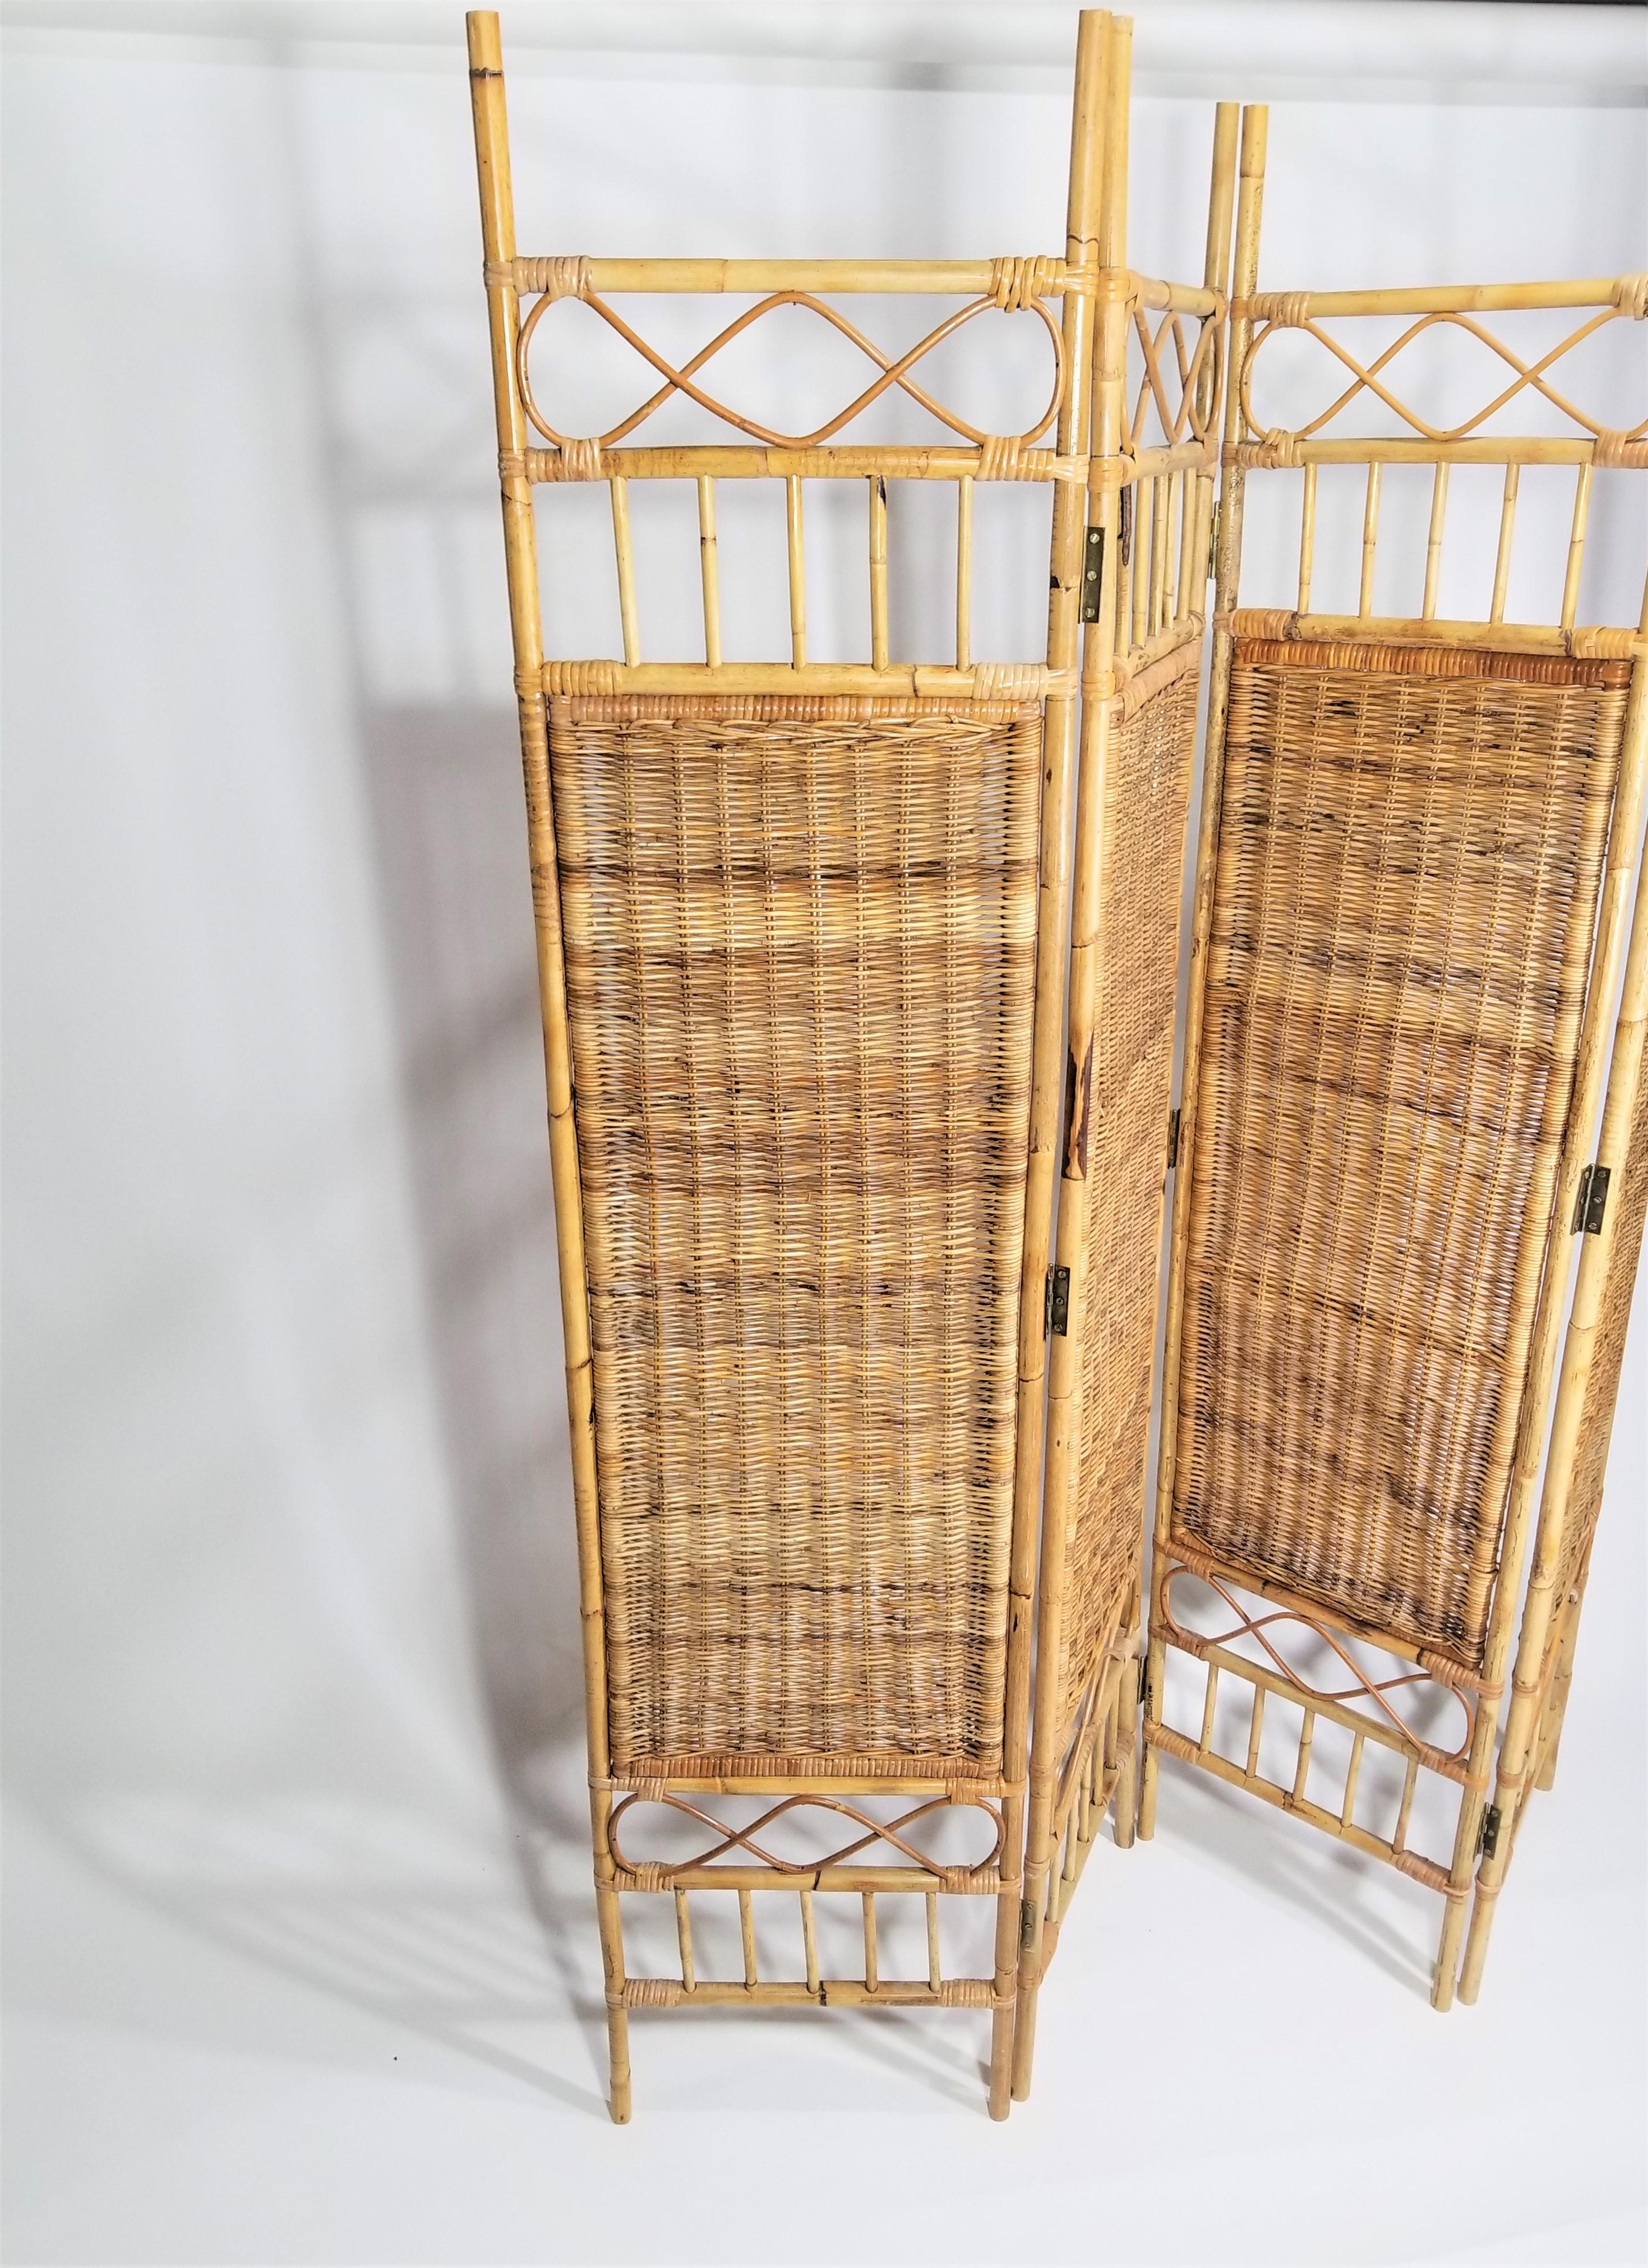 1970s Wicker Rattan Bamboos 4 Panel 6 ft Screen or Room Divider. Natural Color. 

Complimentary Free local delivery in NYC and surrounding areas can be arranged for this item.

 